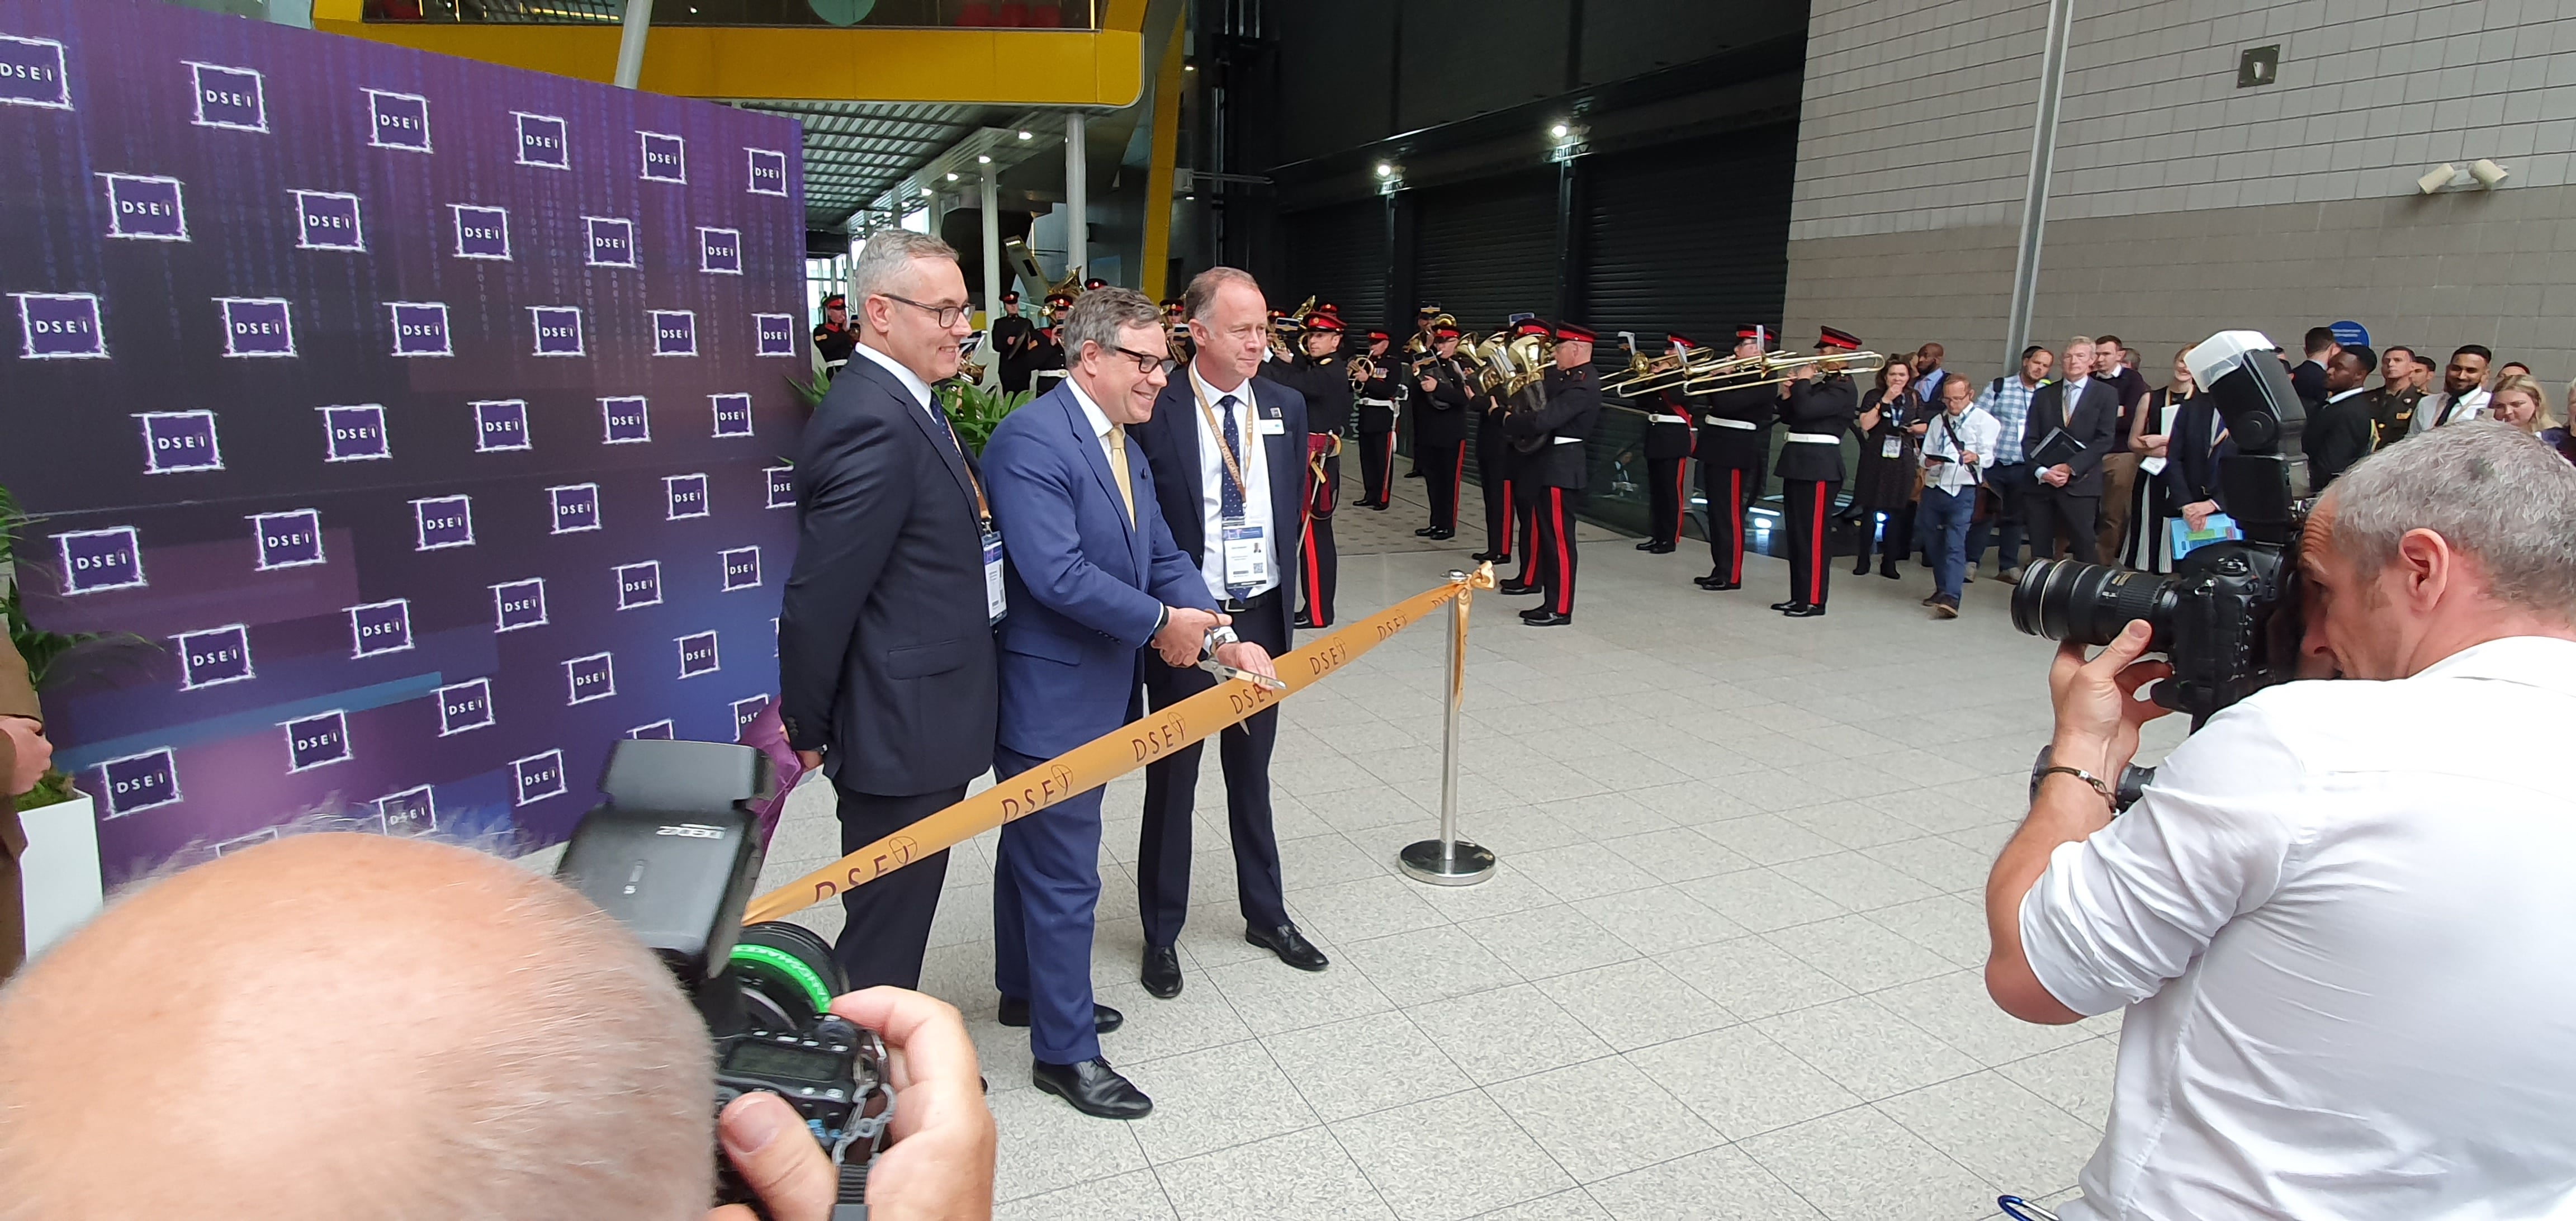 UK Minister for Defence Procurement opens DSEI on 14 September, 2021, saying it would help Britain retain “its position as a leading global exporter”